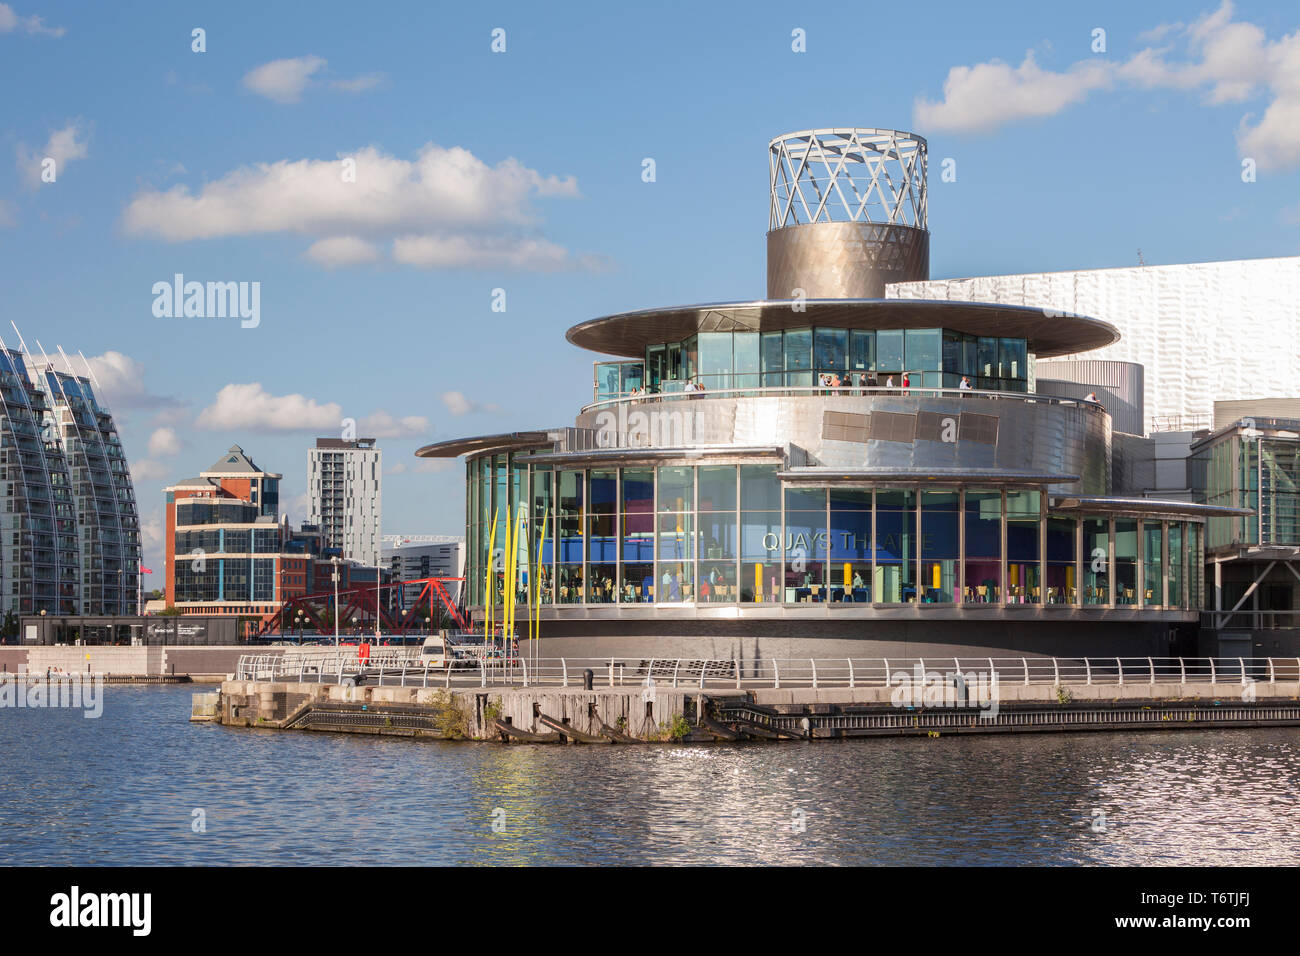 Lowry Theatre, Salford Quays, Manchester, England Stock Photo